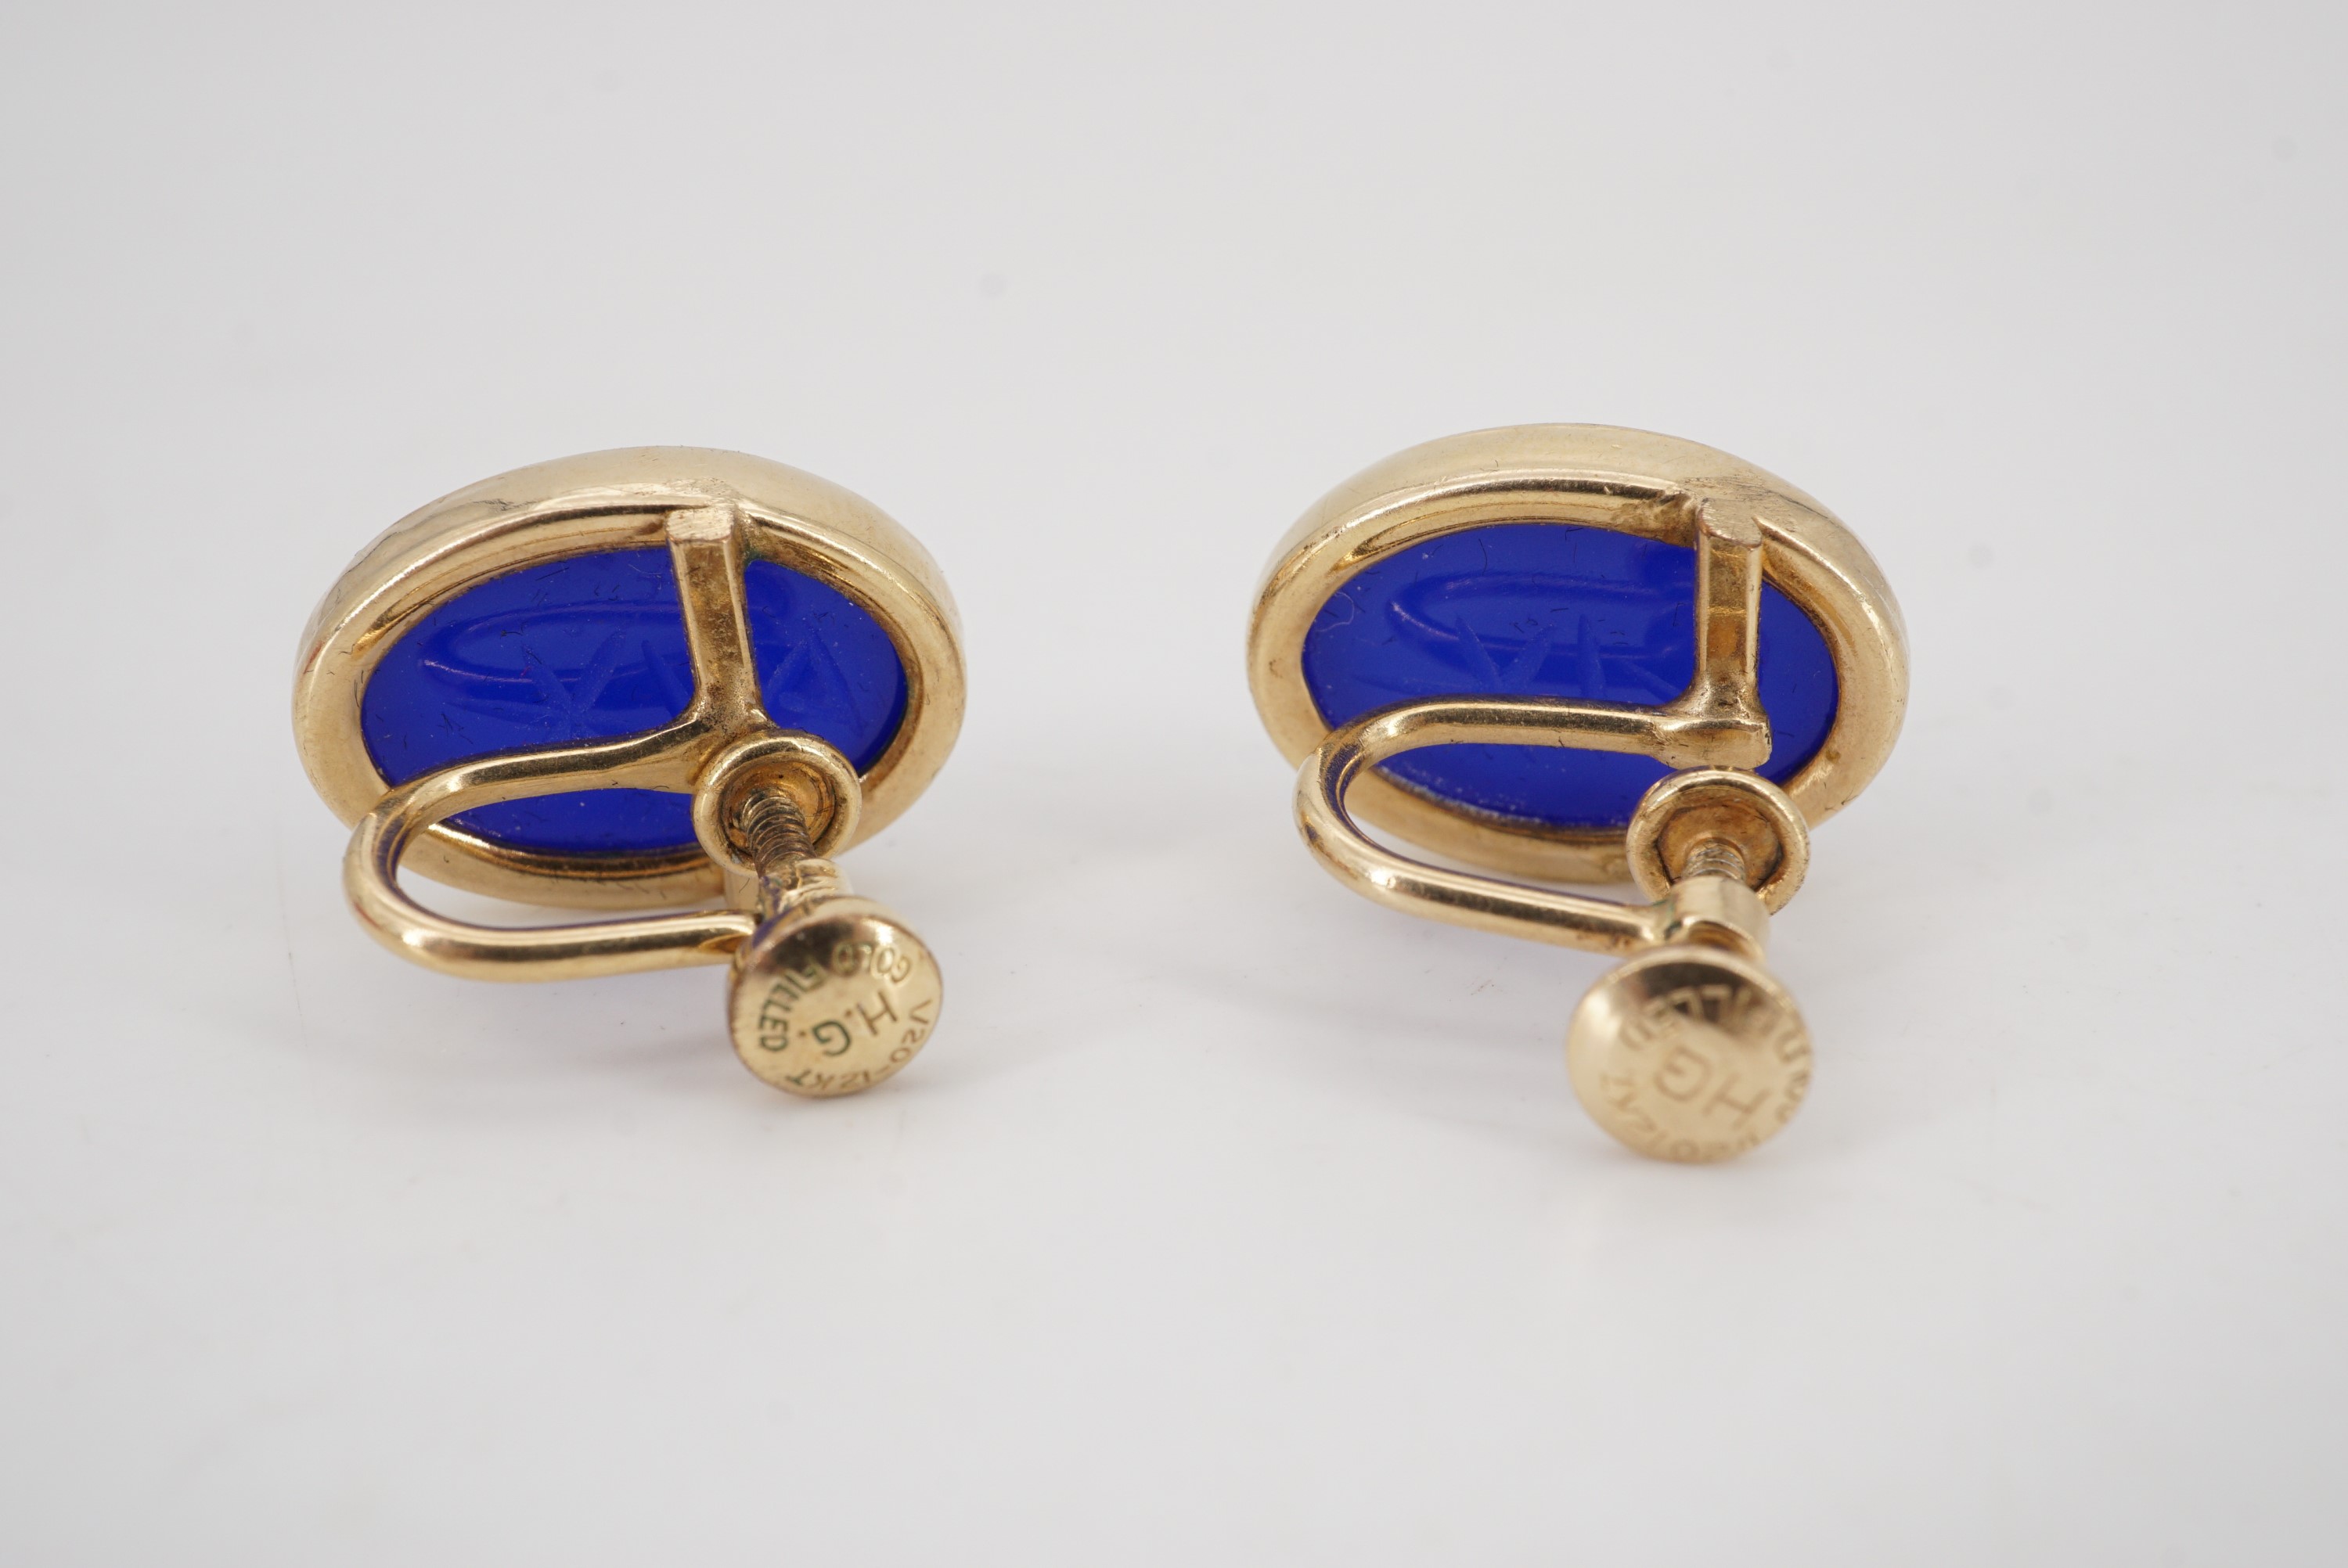 A pair of vintage Egyptianate engraved blue glass scarab screw-back earrings - Image 3 of 4